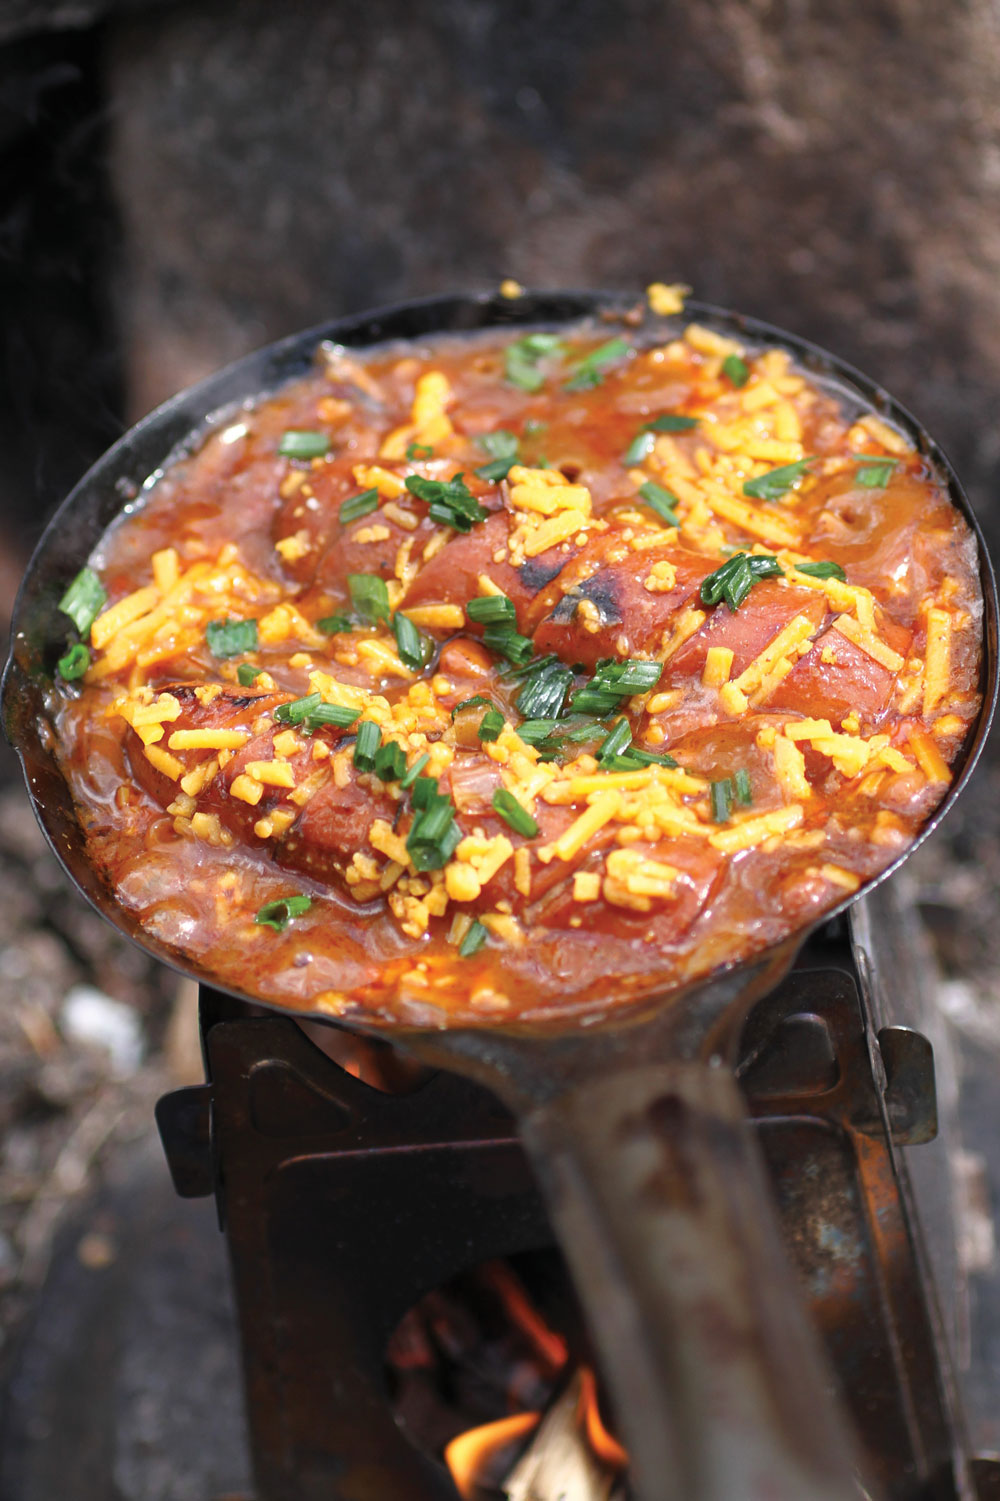 Chili-cheese hot dog skillet cooks over a campsite flame.